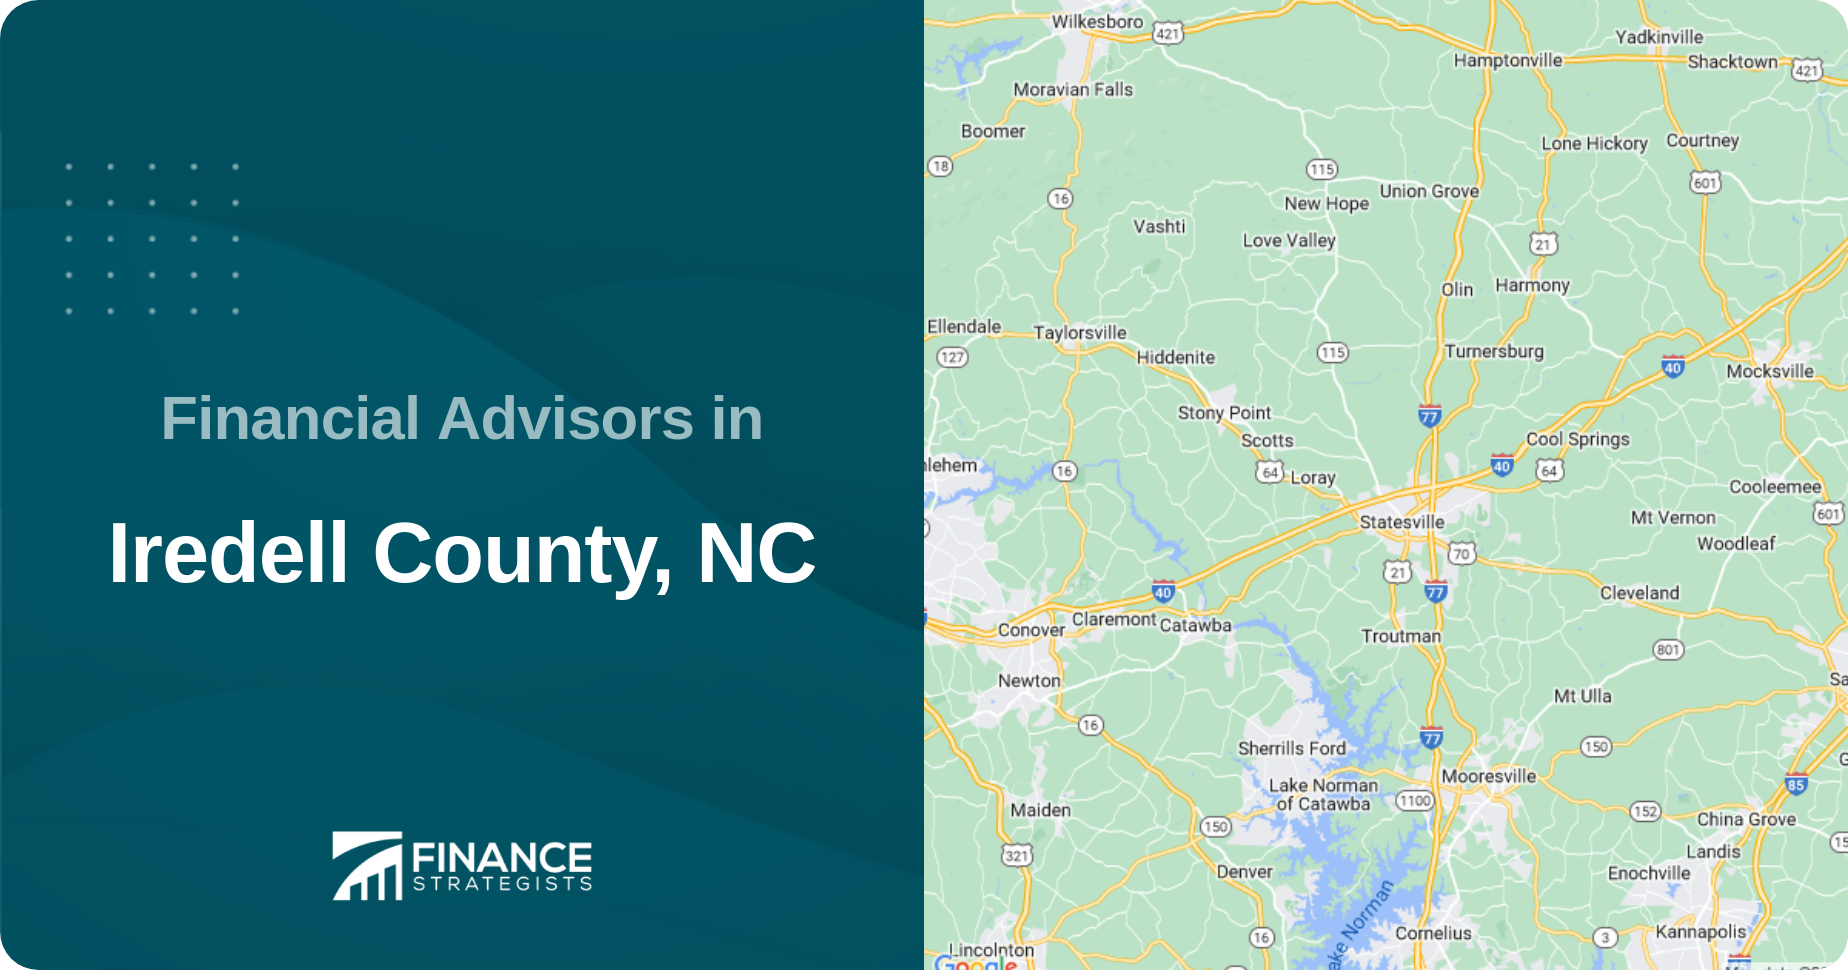 Financial Advisors in Iredell County, NC